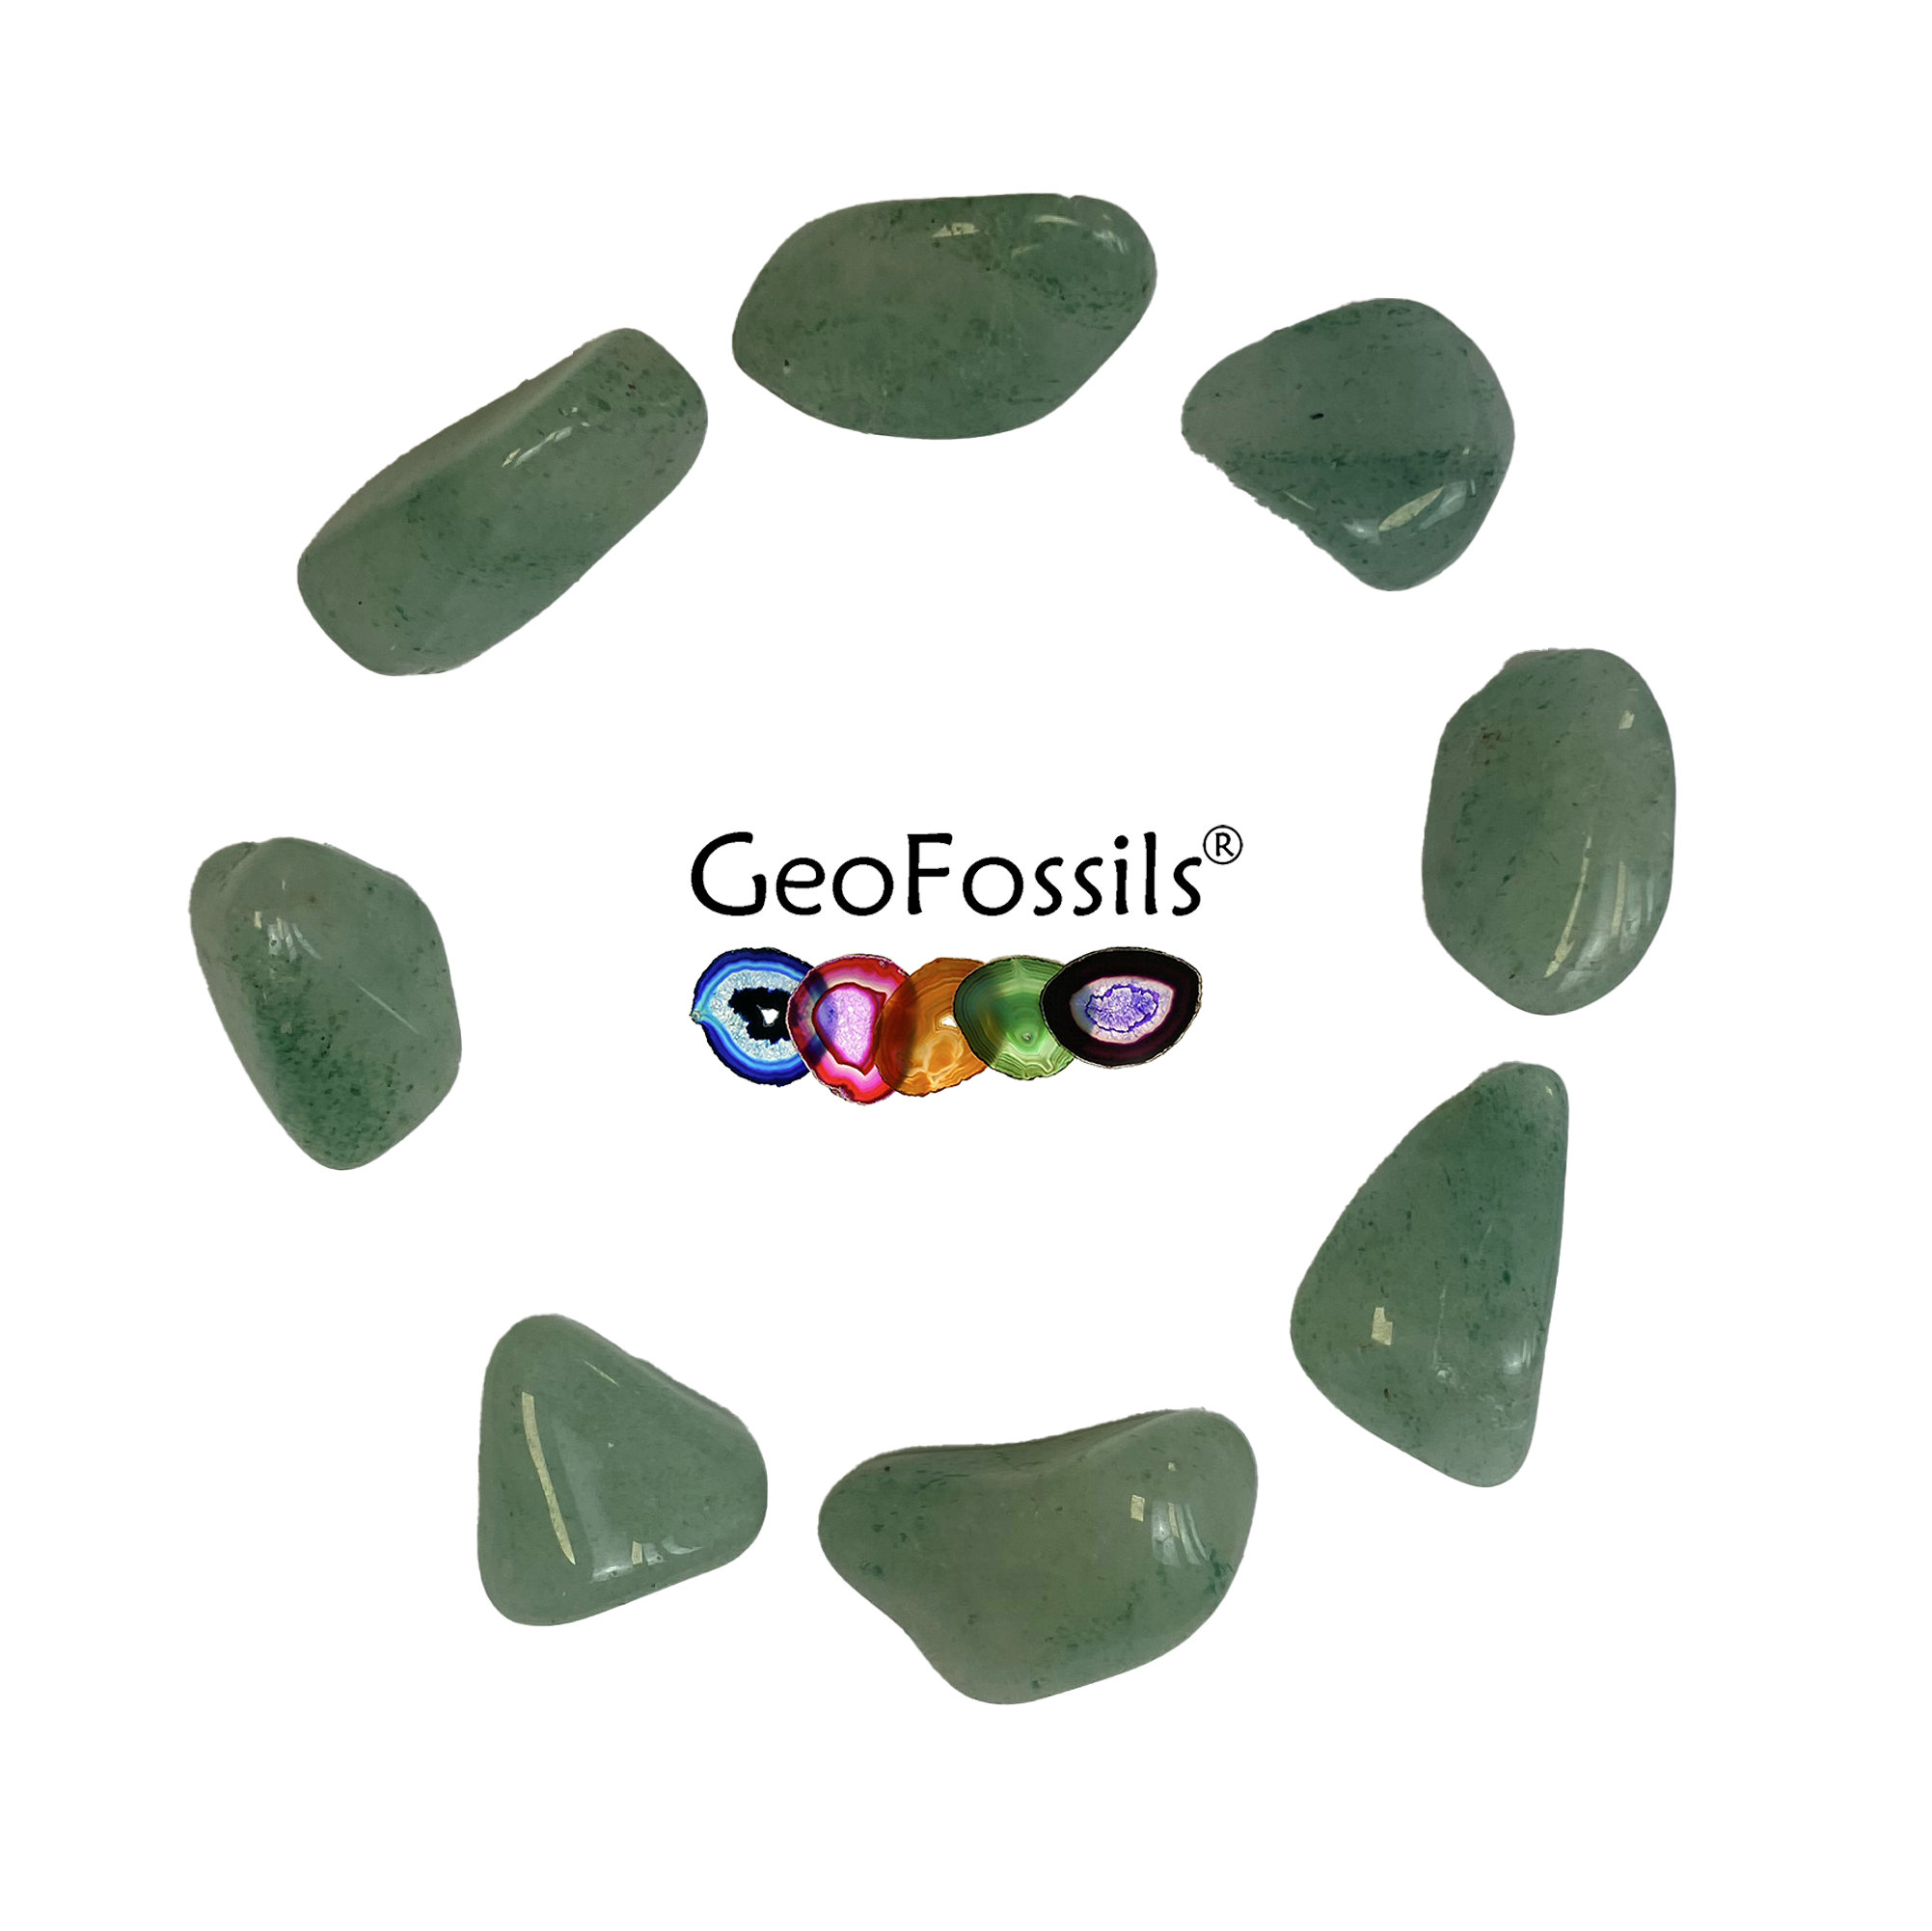 GeoFossils Green Aventurine Polished Tumble Stone Healing Crystals